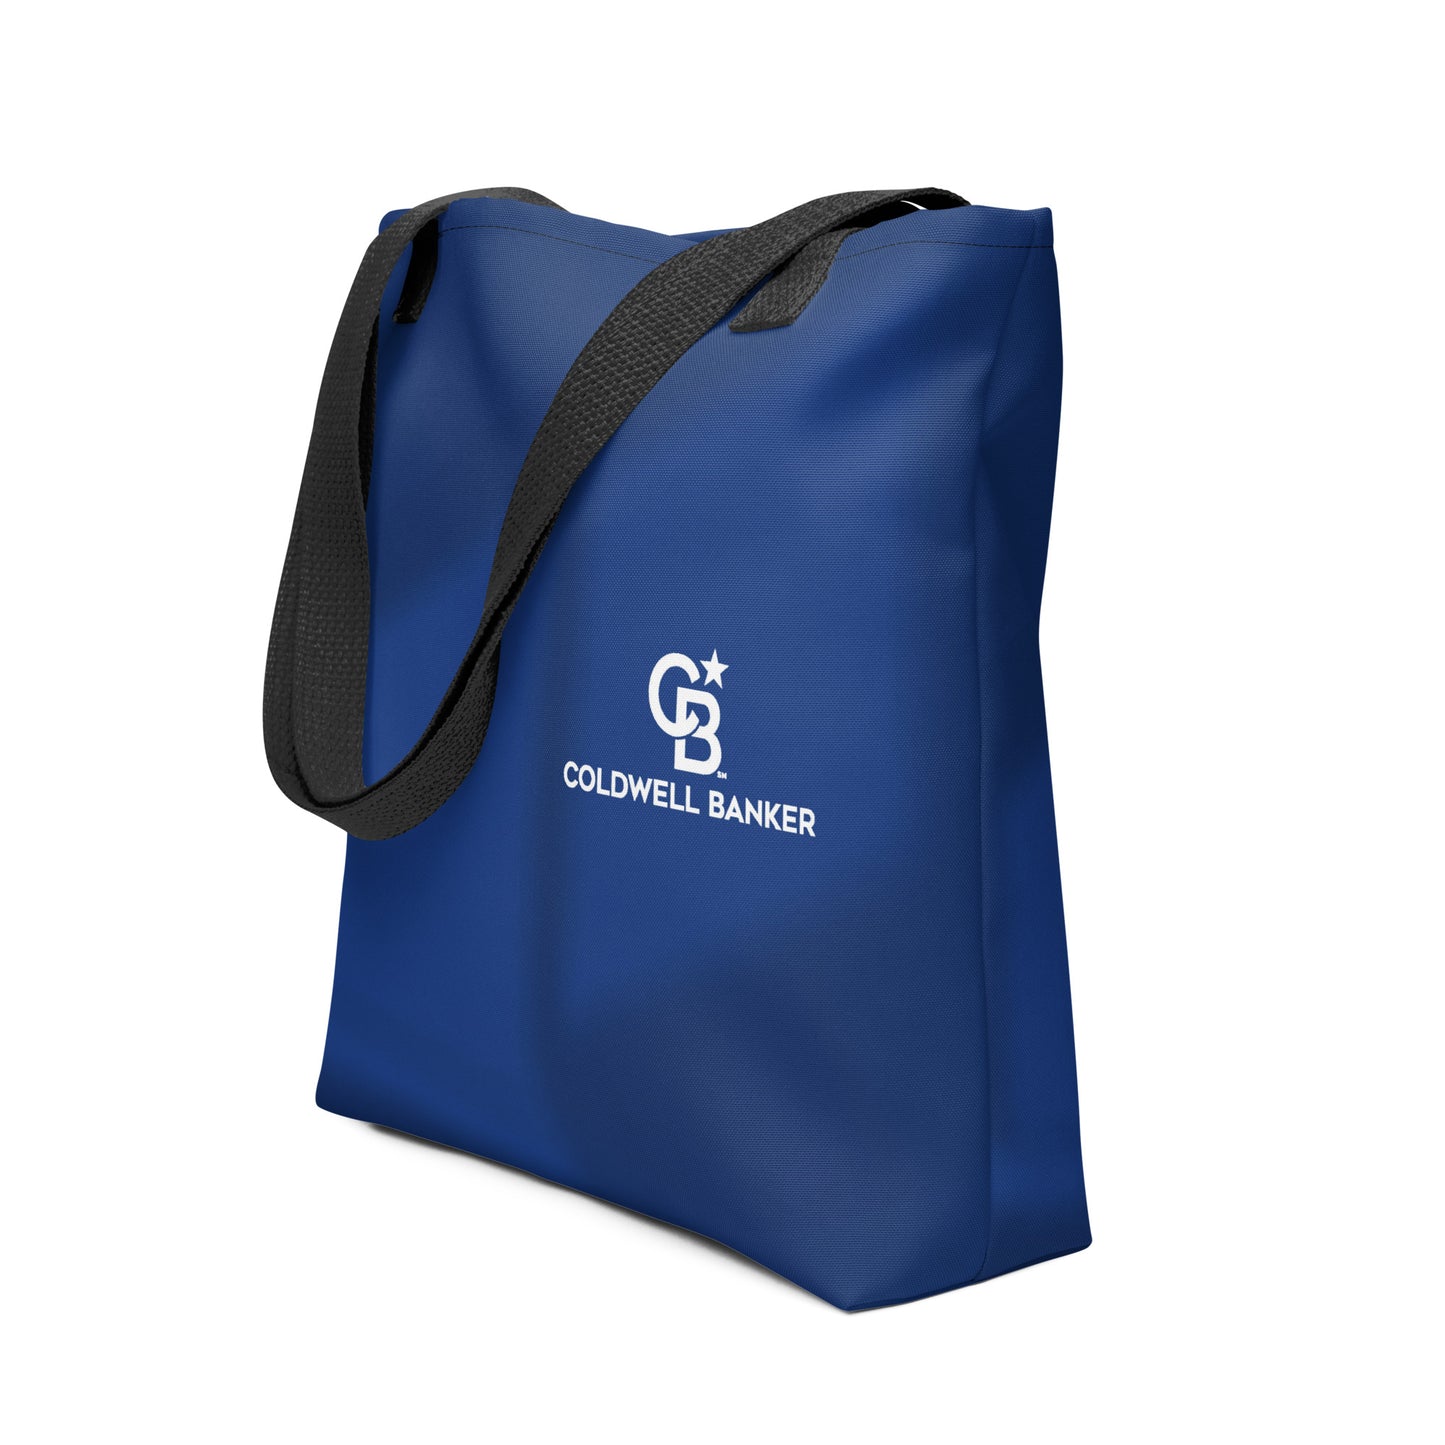 Coldwell Banker Tote bag Blue